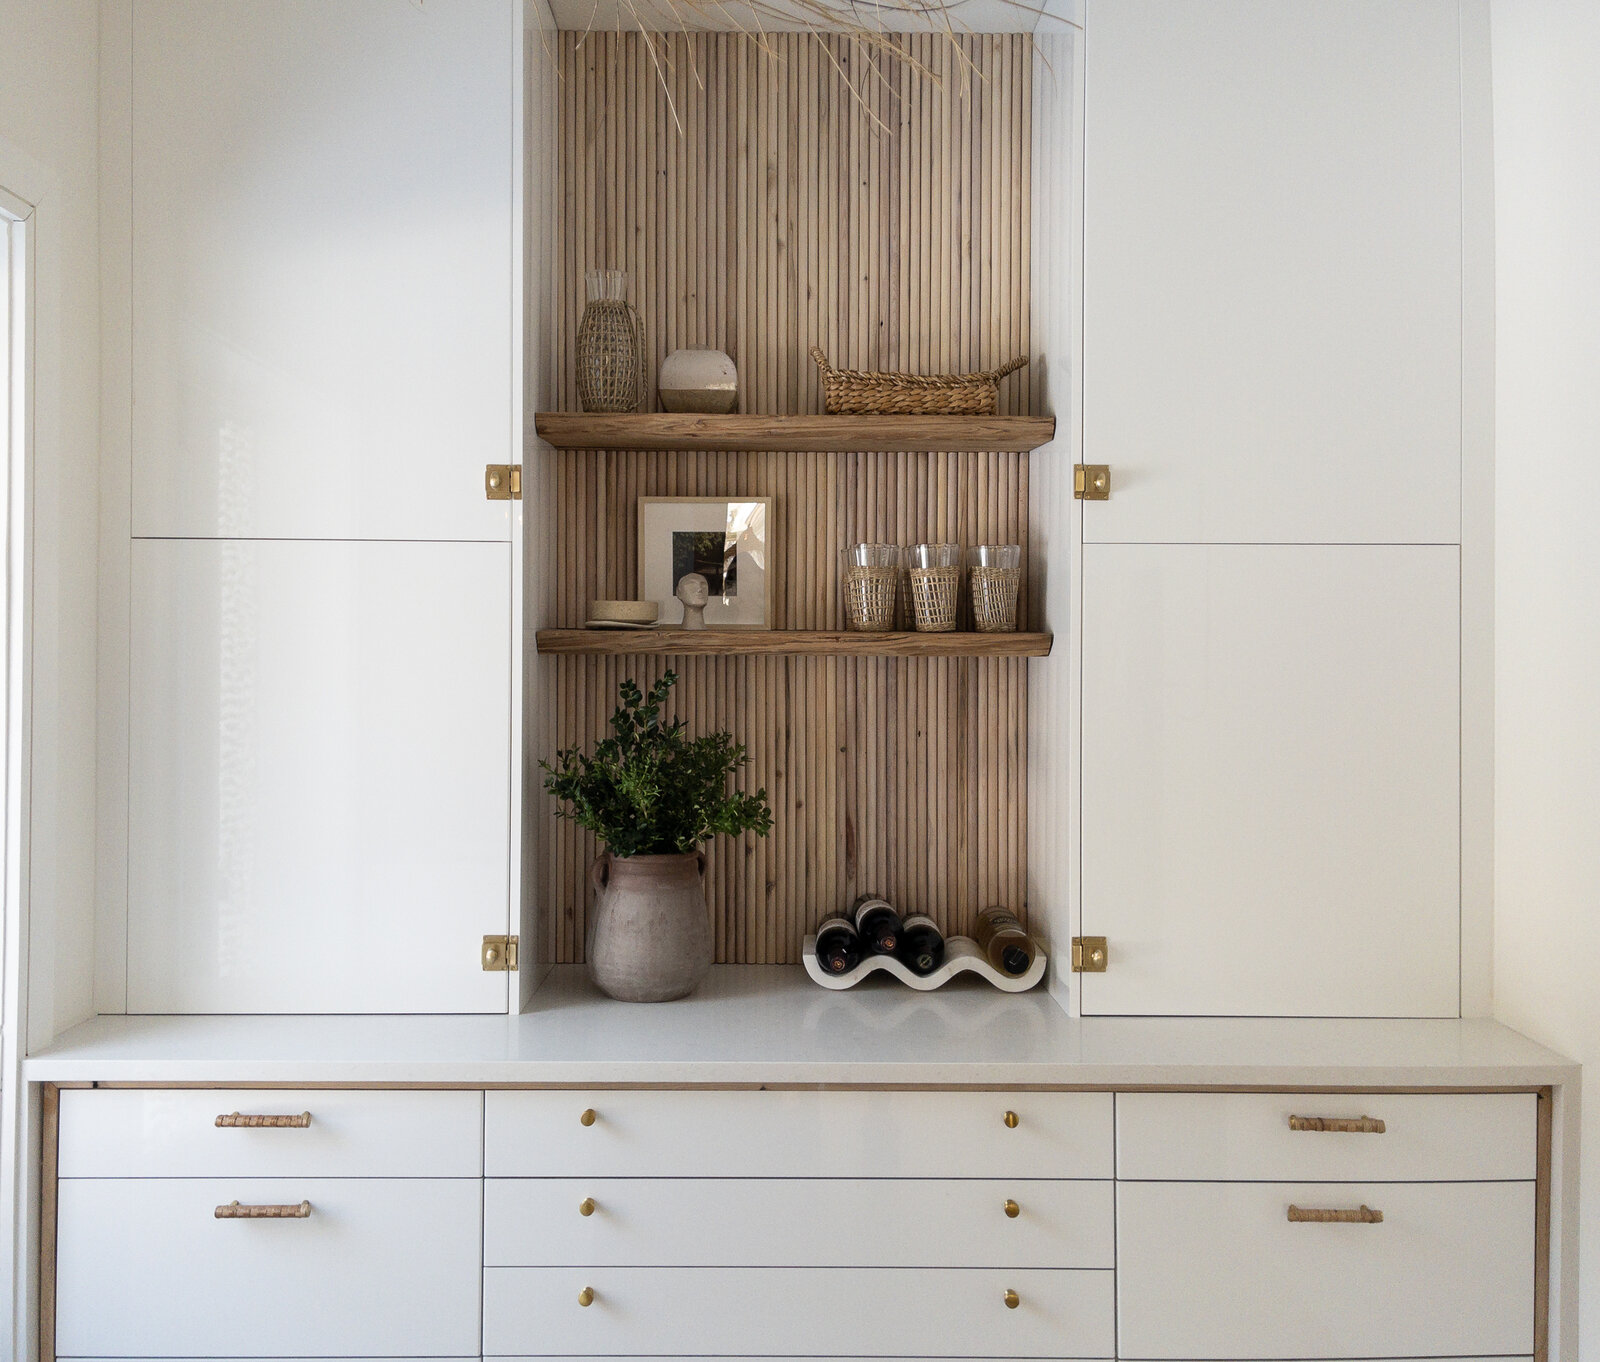 KITCHEN PANTRY IDEAS WITH IKEA CANADA CABINETRY copy